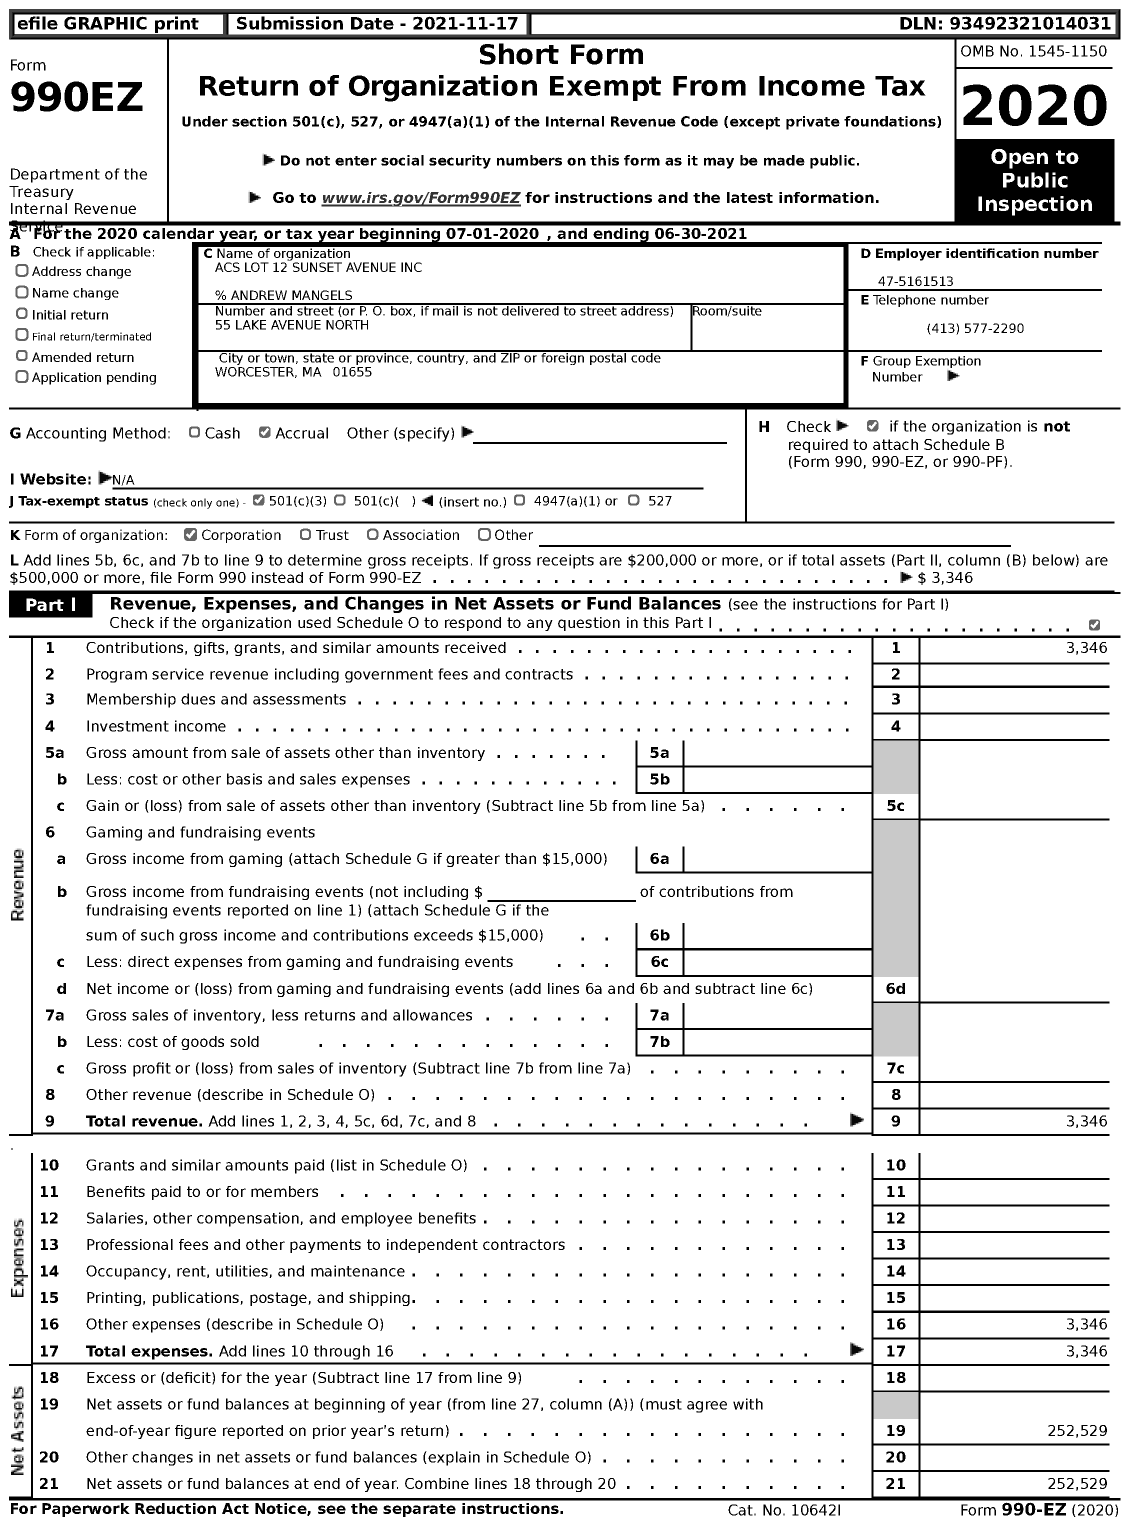 Image of first page of 2020 Form 990EZ for Acs Lot 12 Sunset Avenue